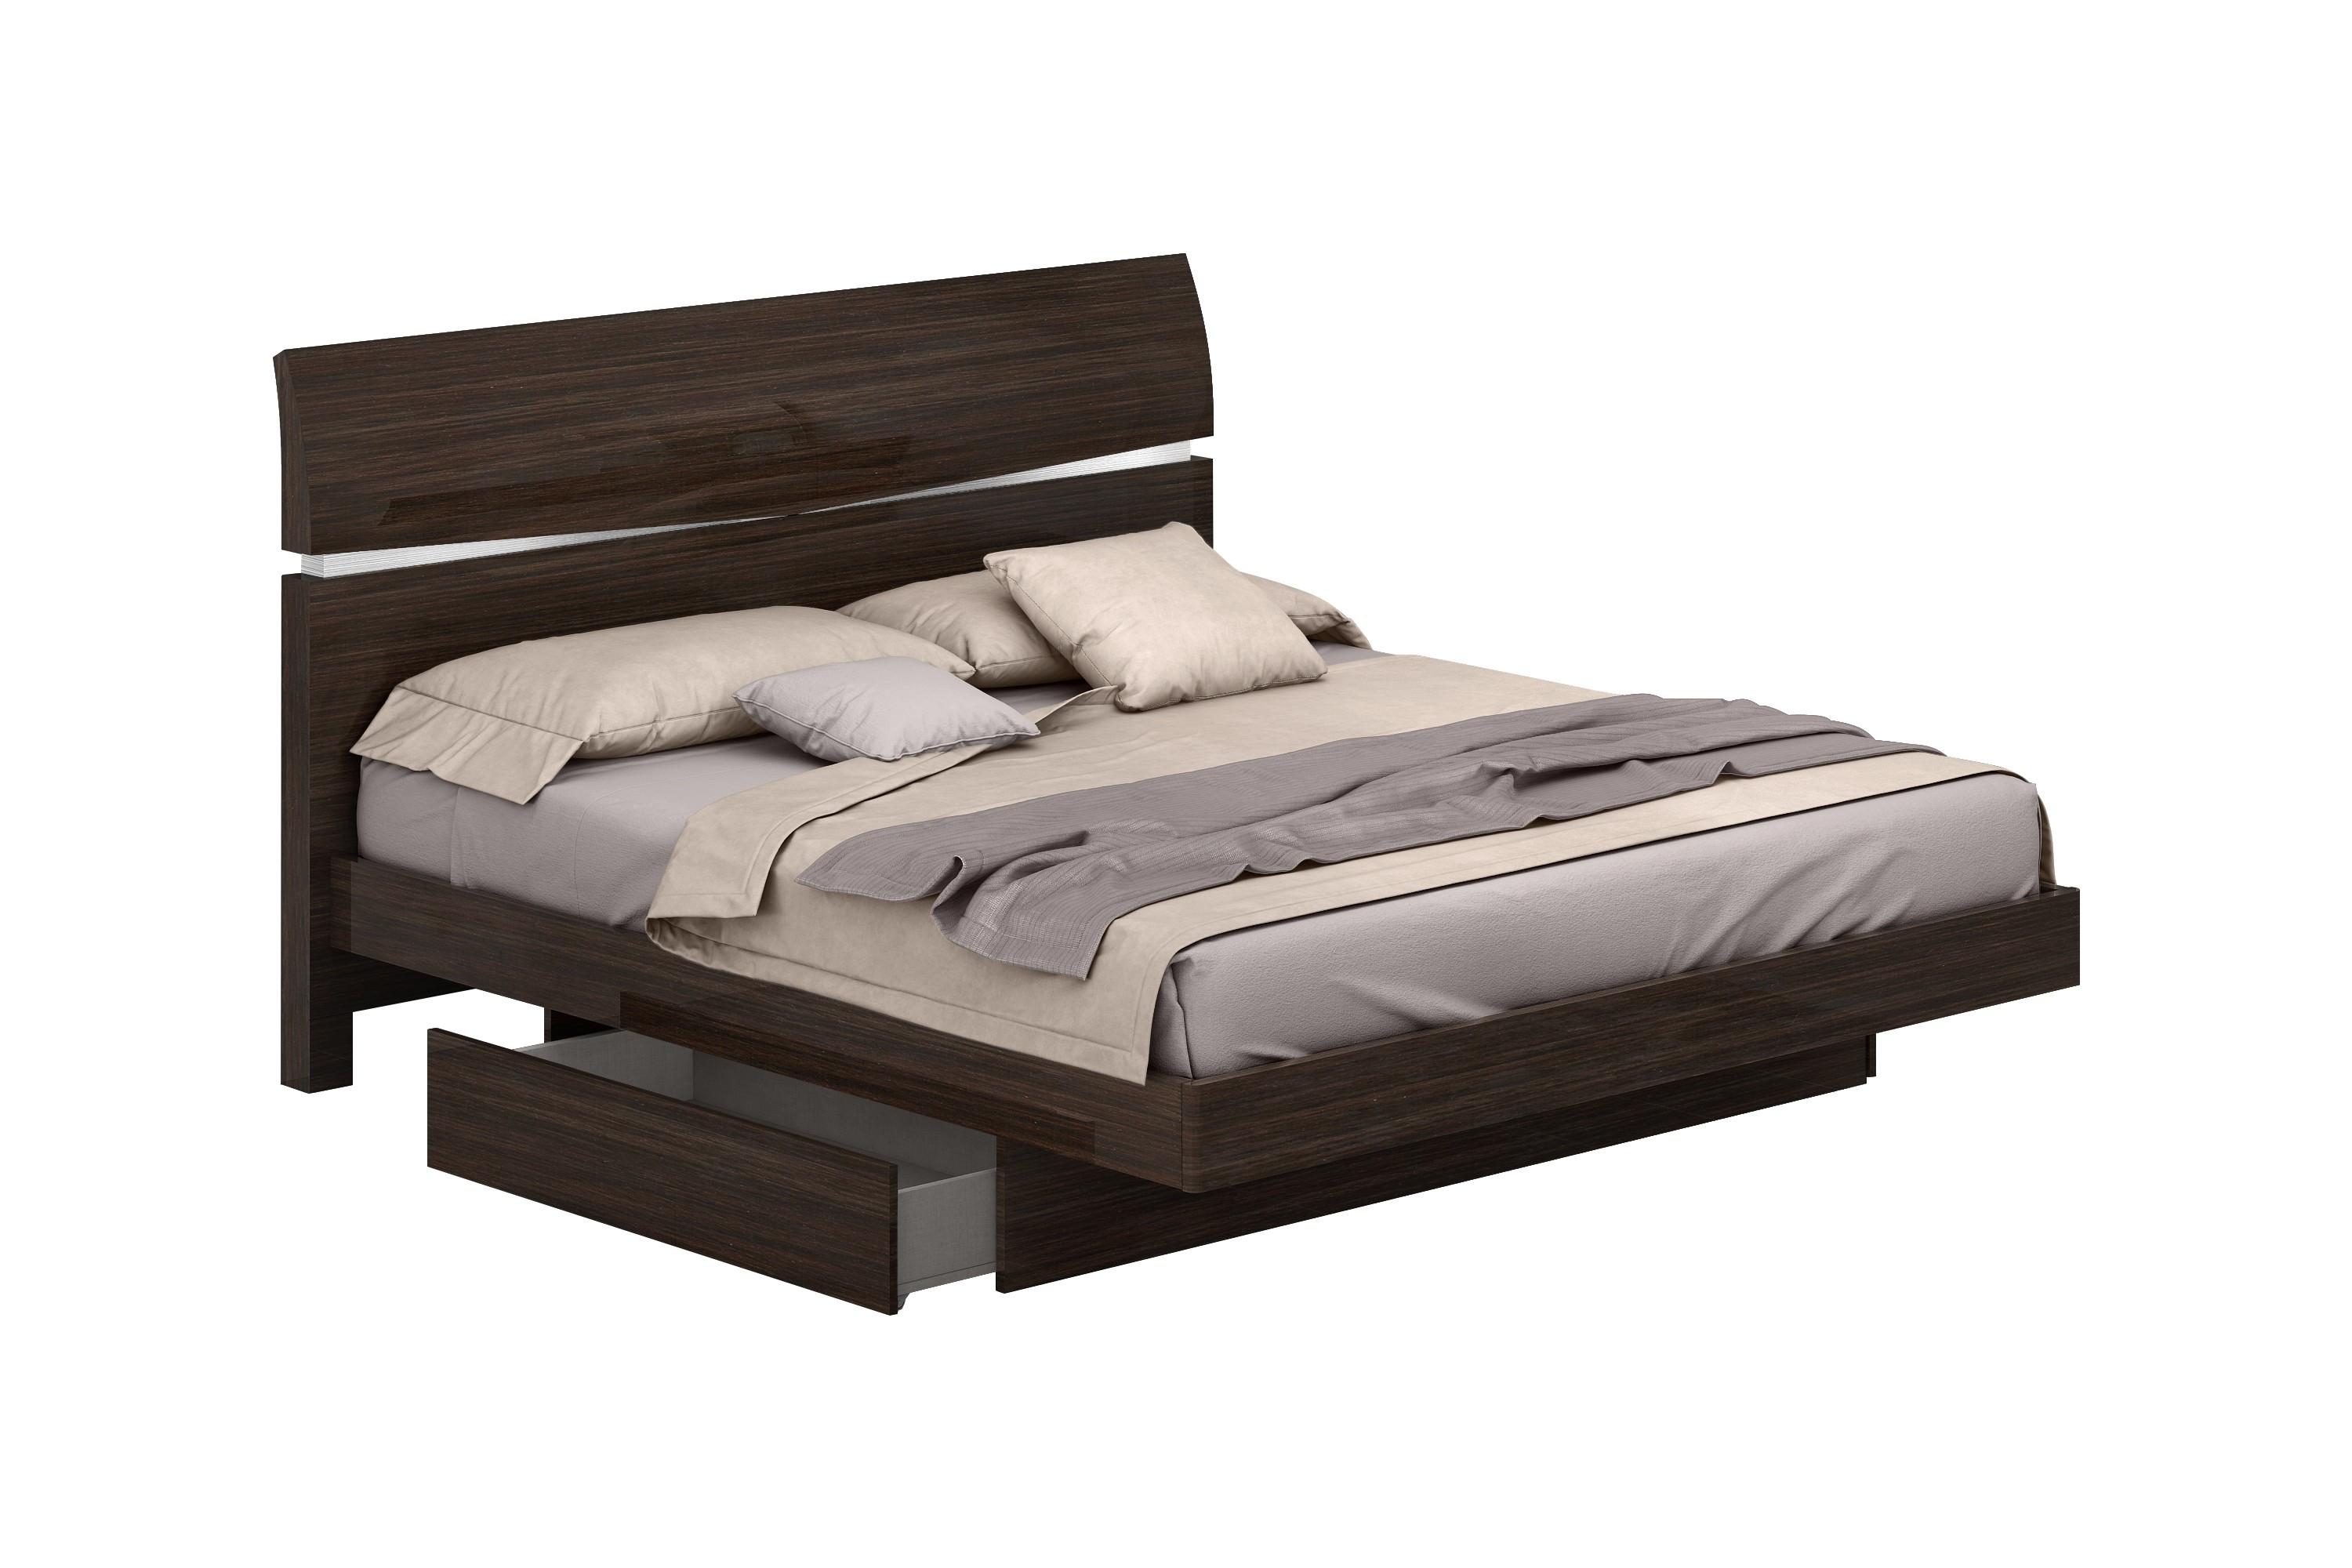 Contemporary, Modern Platform Bed Wynn WYNN-BED-WENGE-Q in Wenge, Silver Lacquer